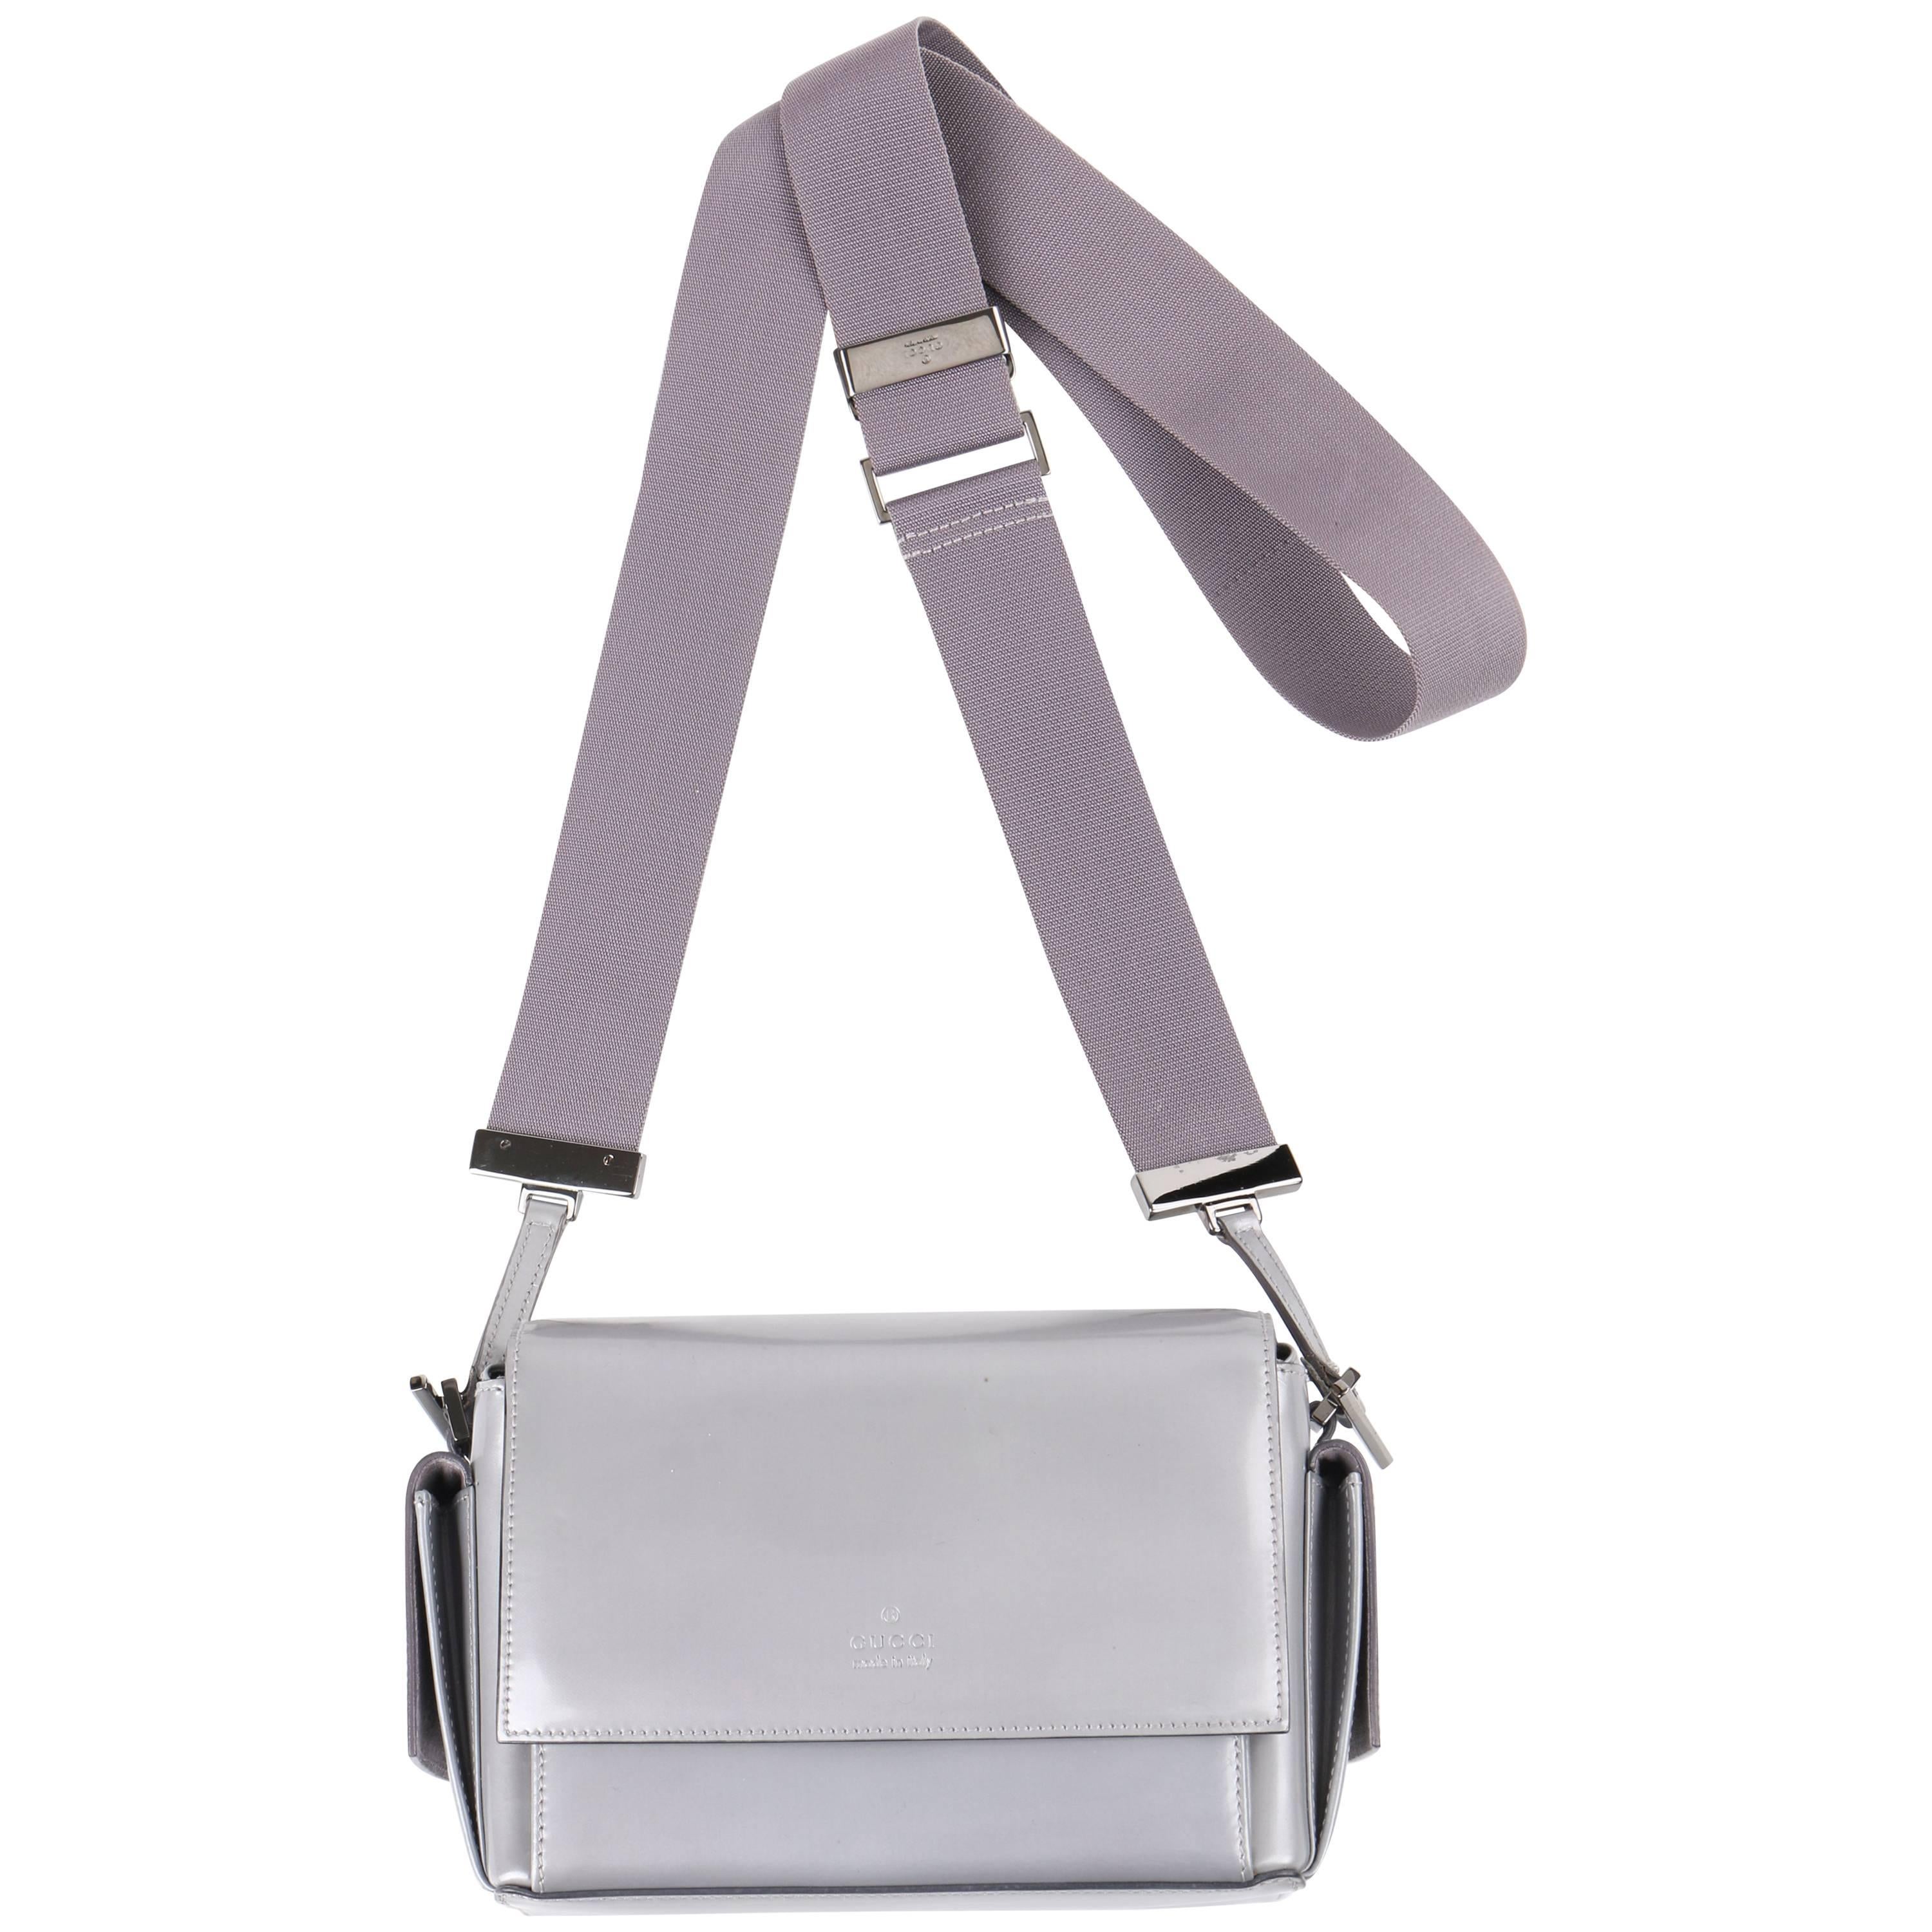 GUCCI Stone Gray Patent Leather Structured Flap Top Crossbody Bag Purse